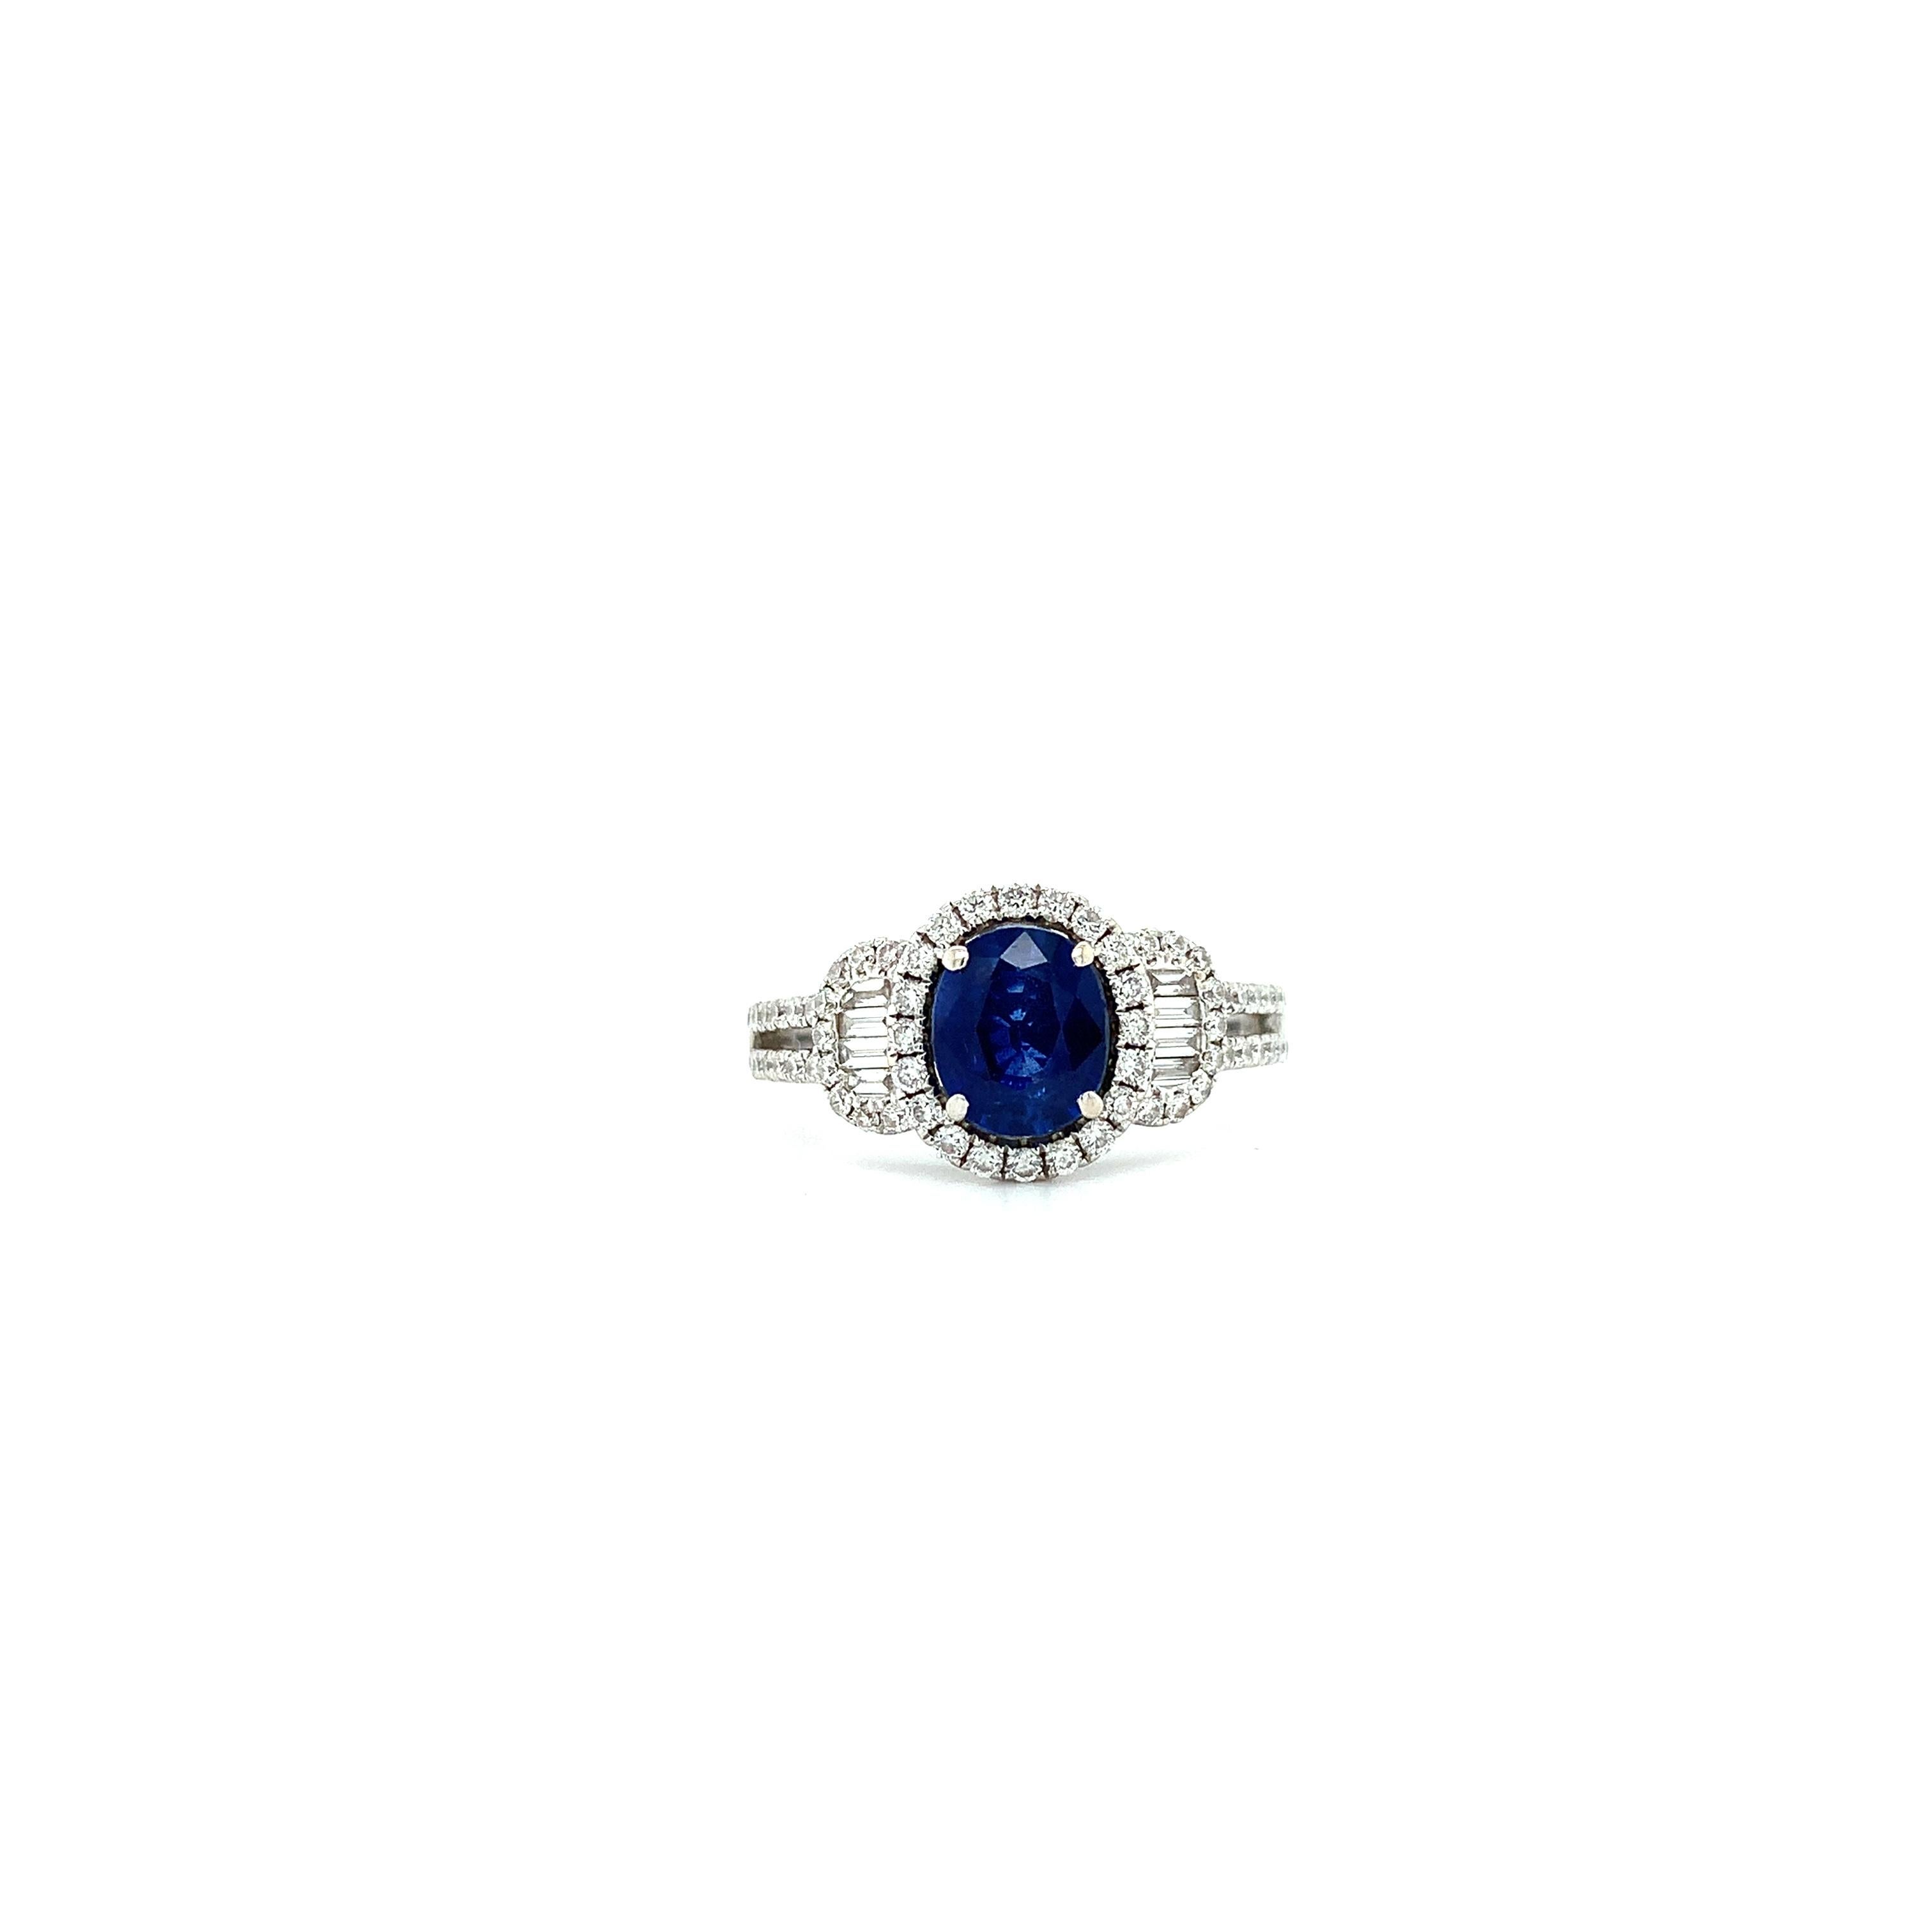 Royal sapphire diamond halo art deco cocktail ring 18k white gold In New Condition For Sale In London, GB